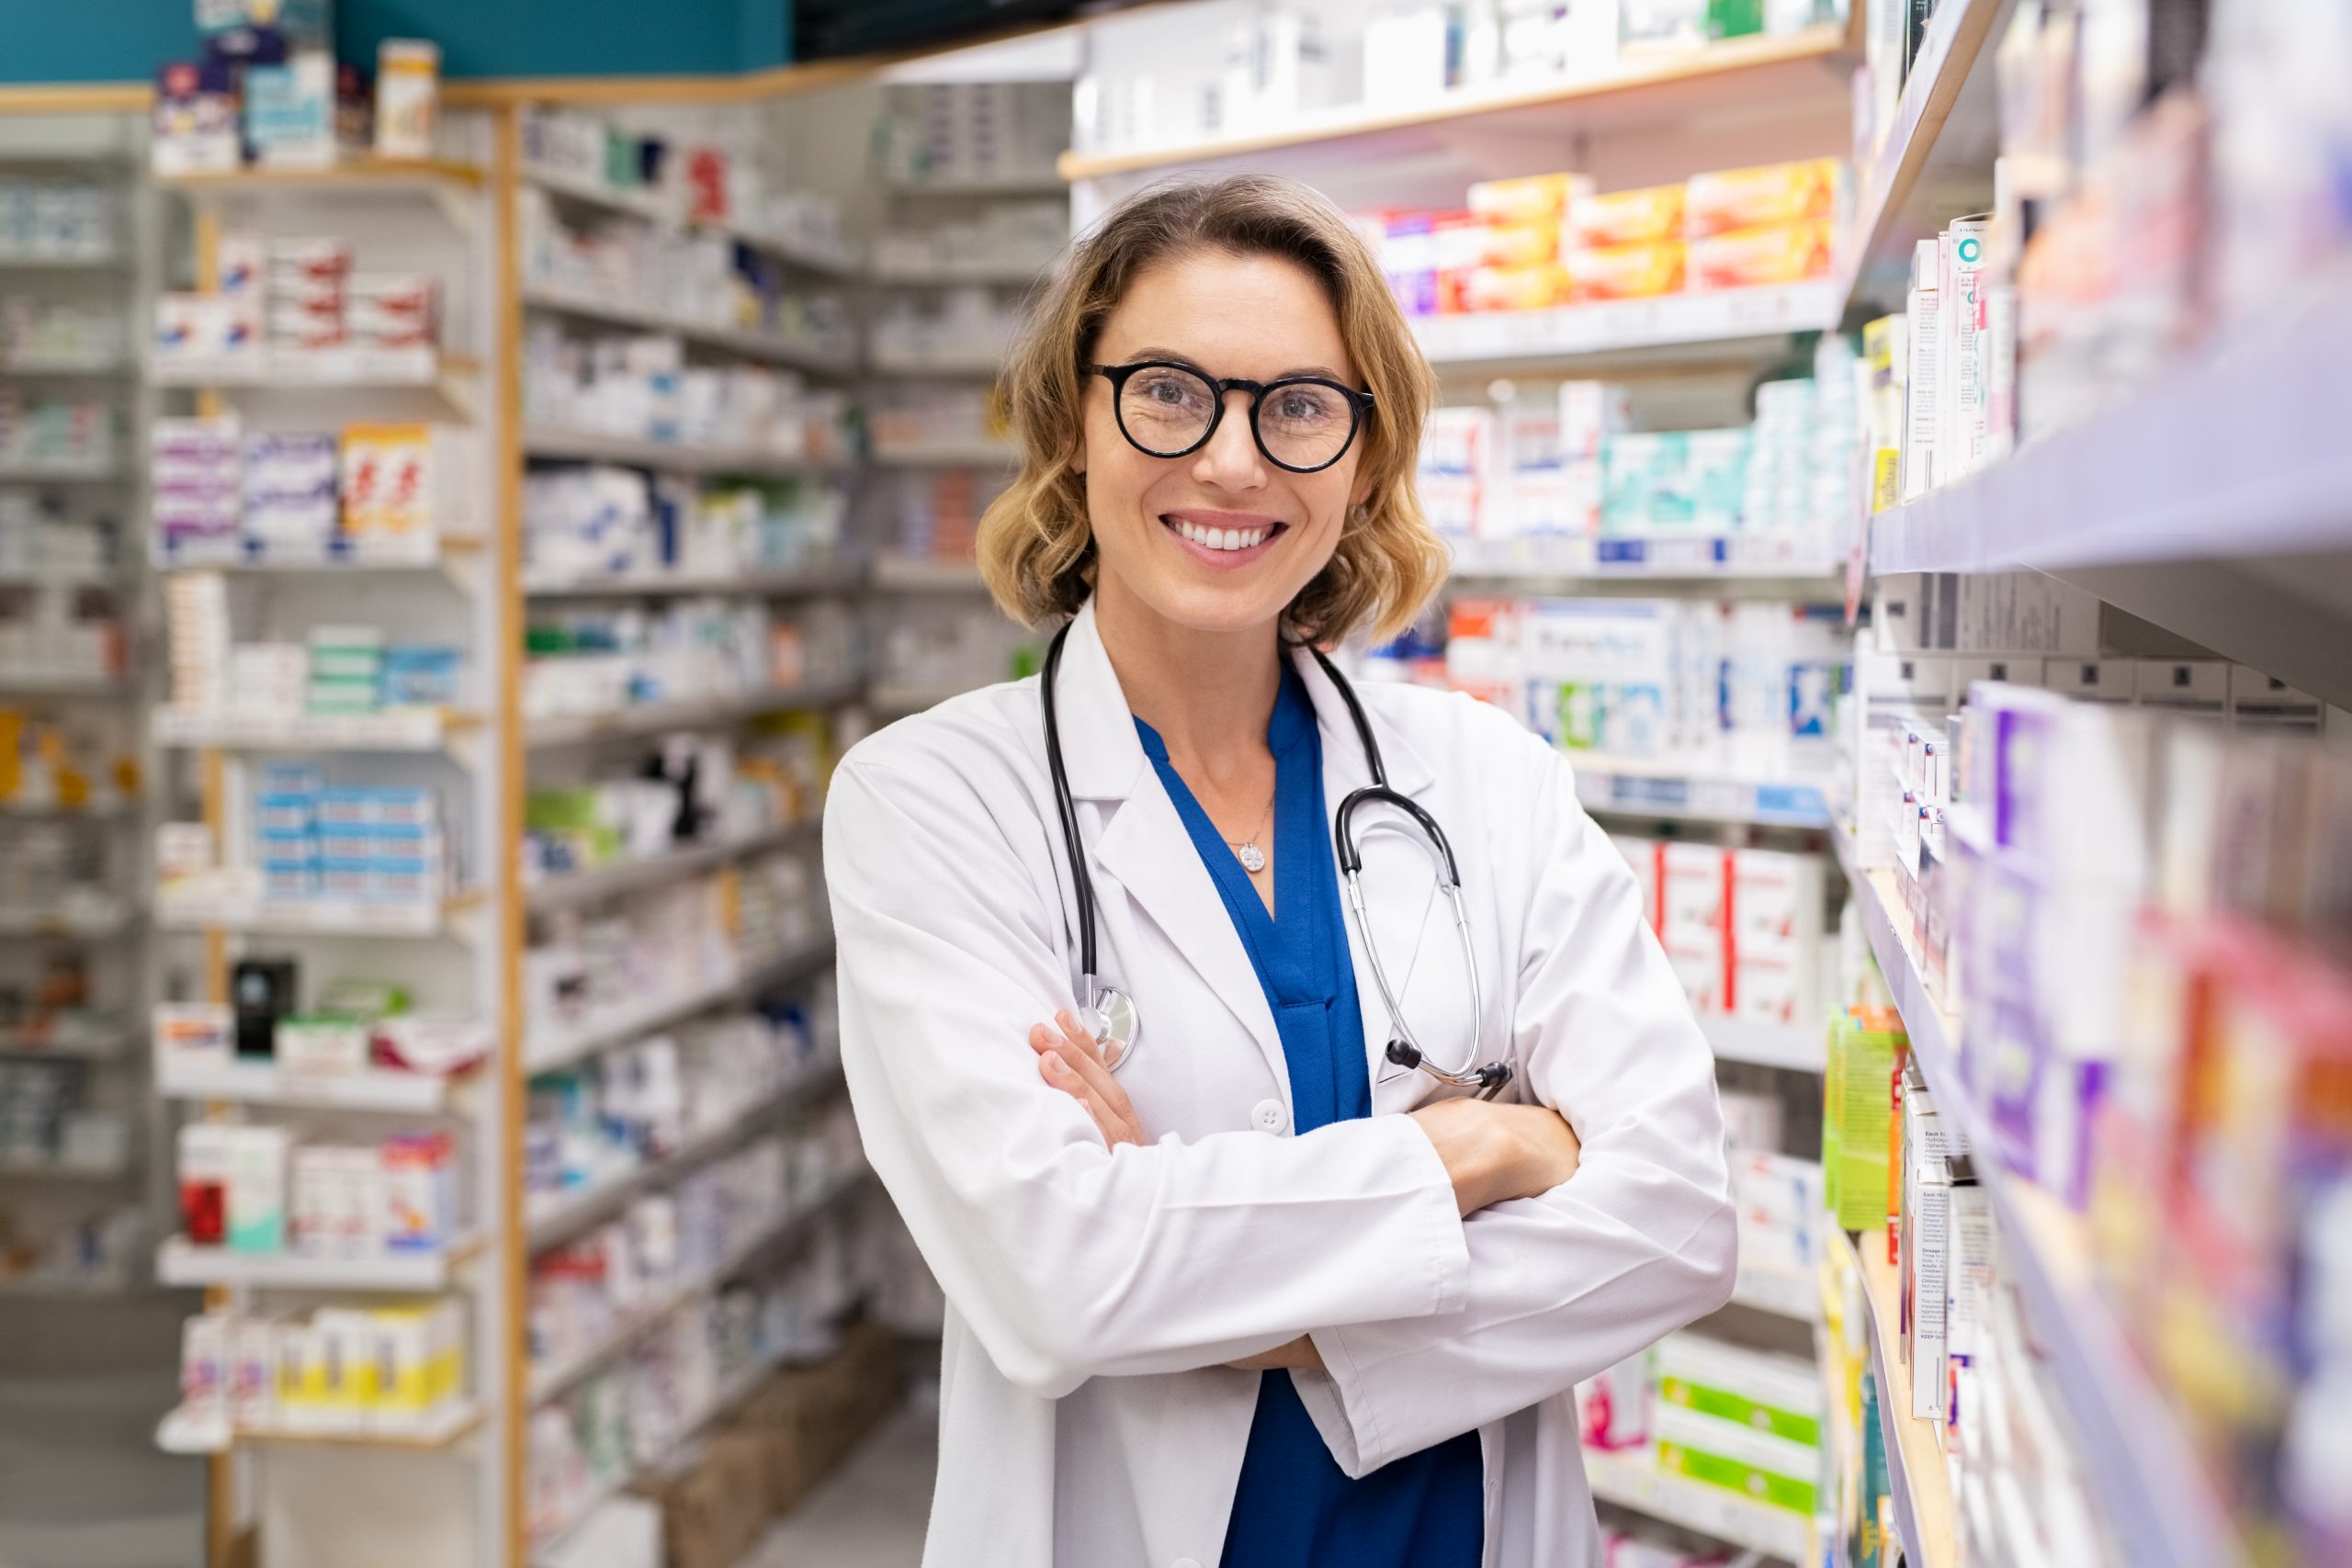 Portrait of mature woman pharmacist at pharmacy wearing labcoat with stethoscope. Happy smiling doctor standing in modern pharmacy drugstore. Friendly young pharmacist owner standing in shop and looking at camera.